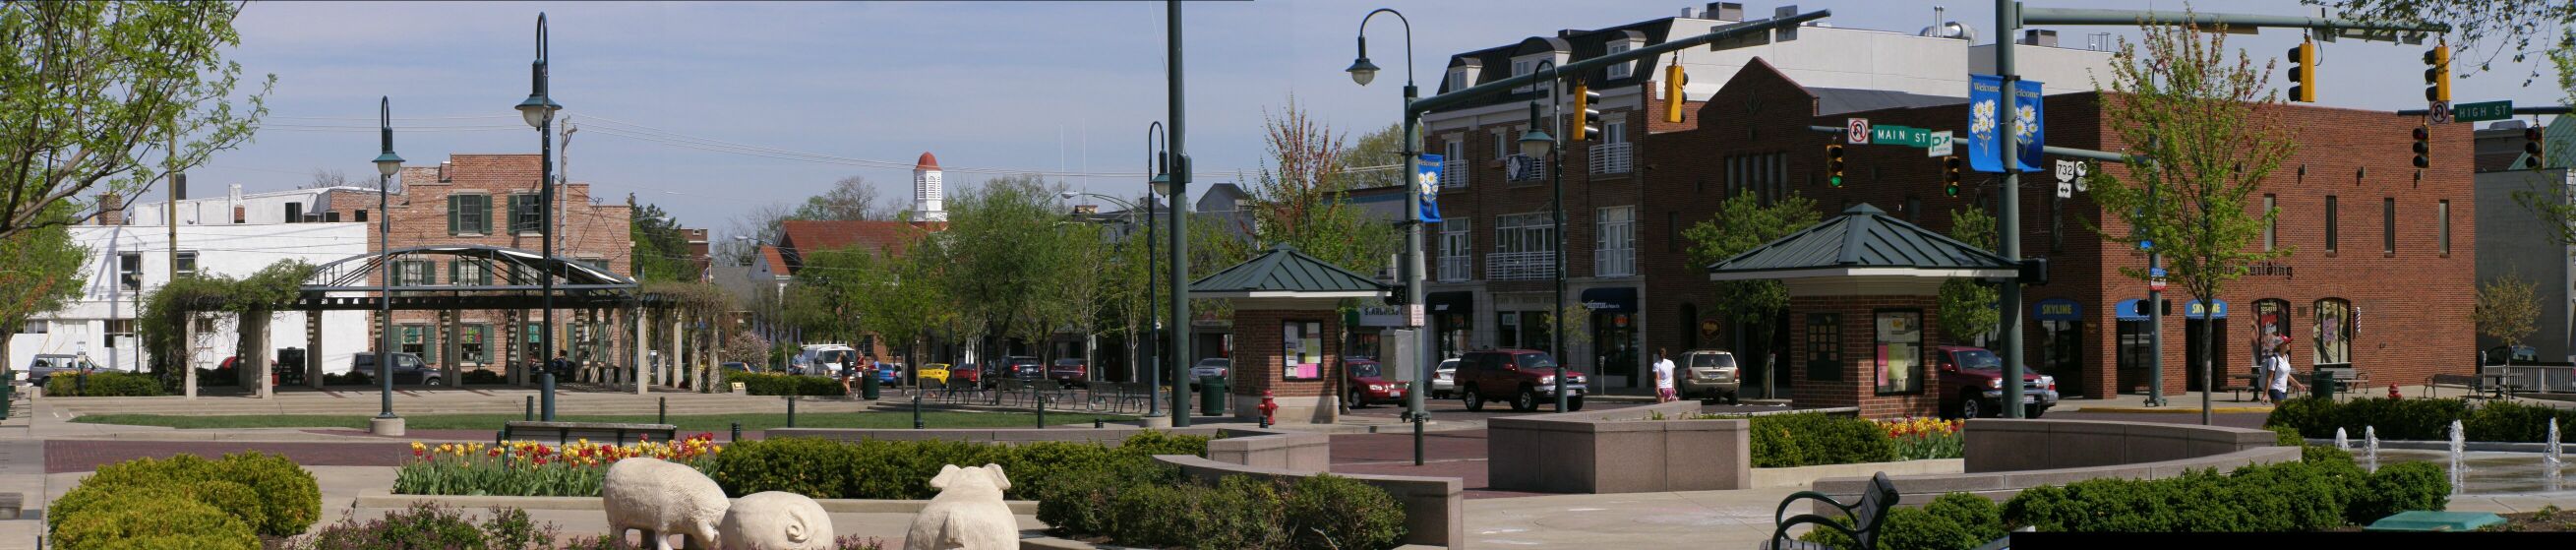 Image of Oxford, OH